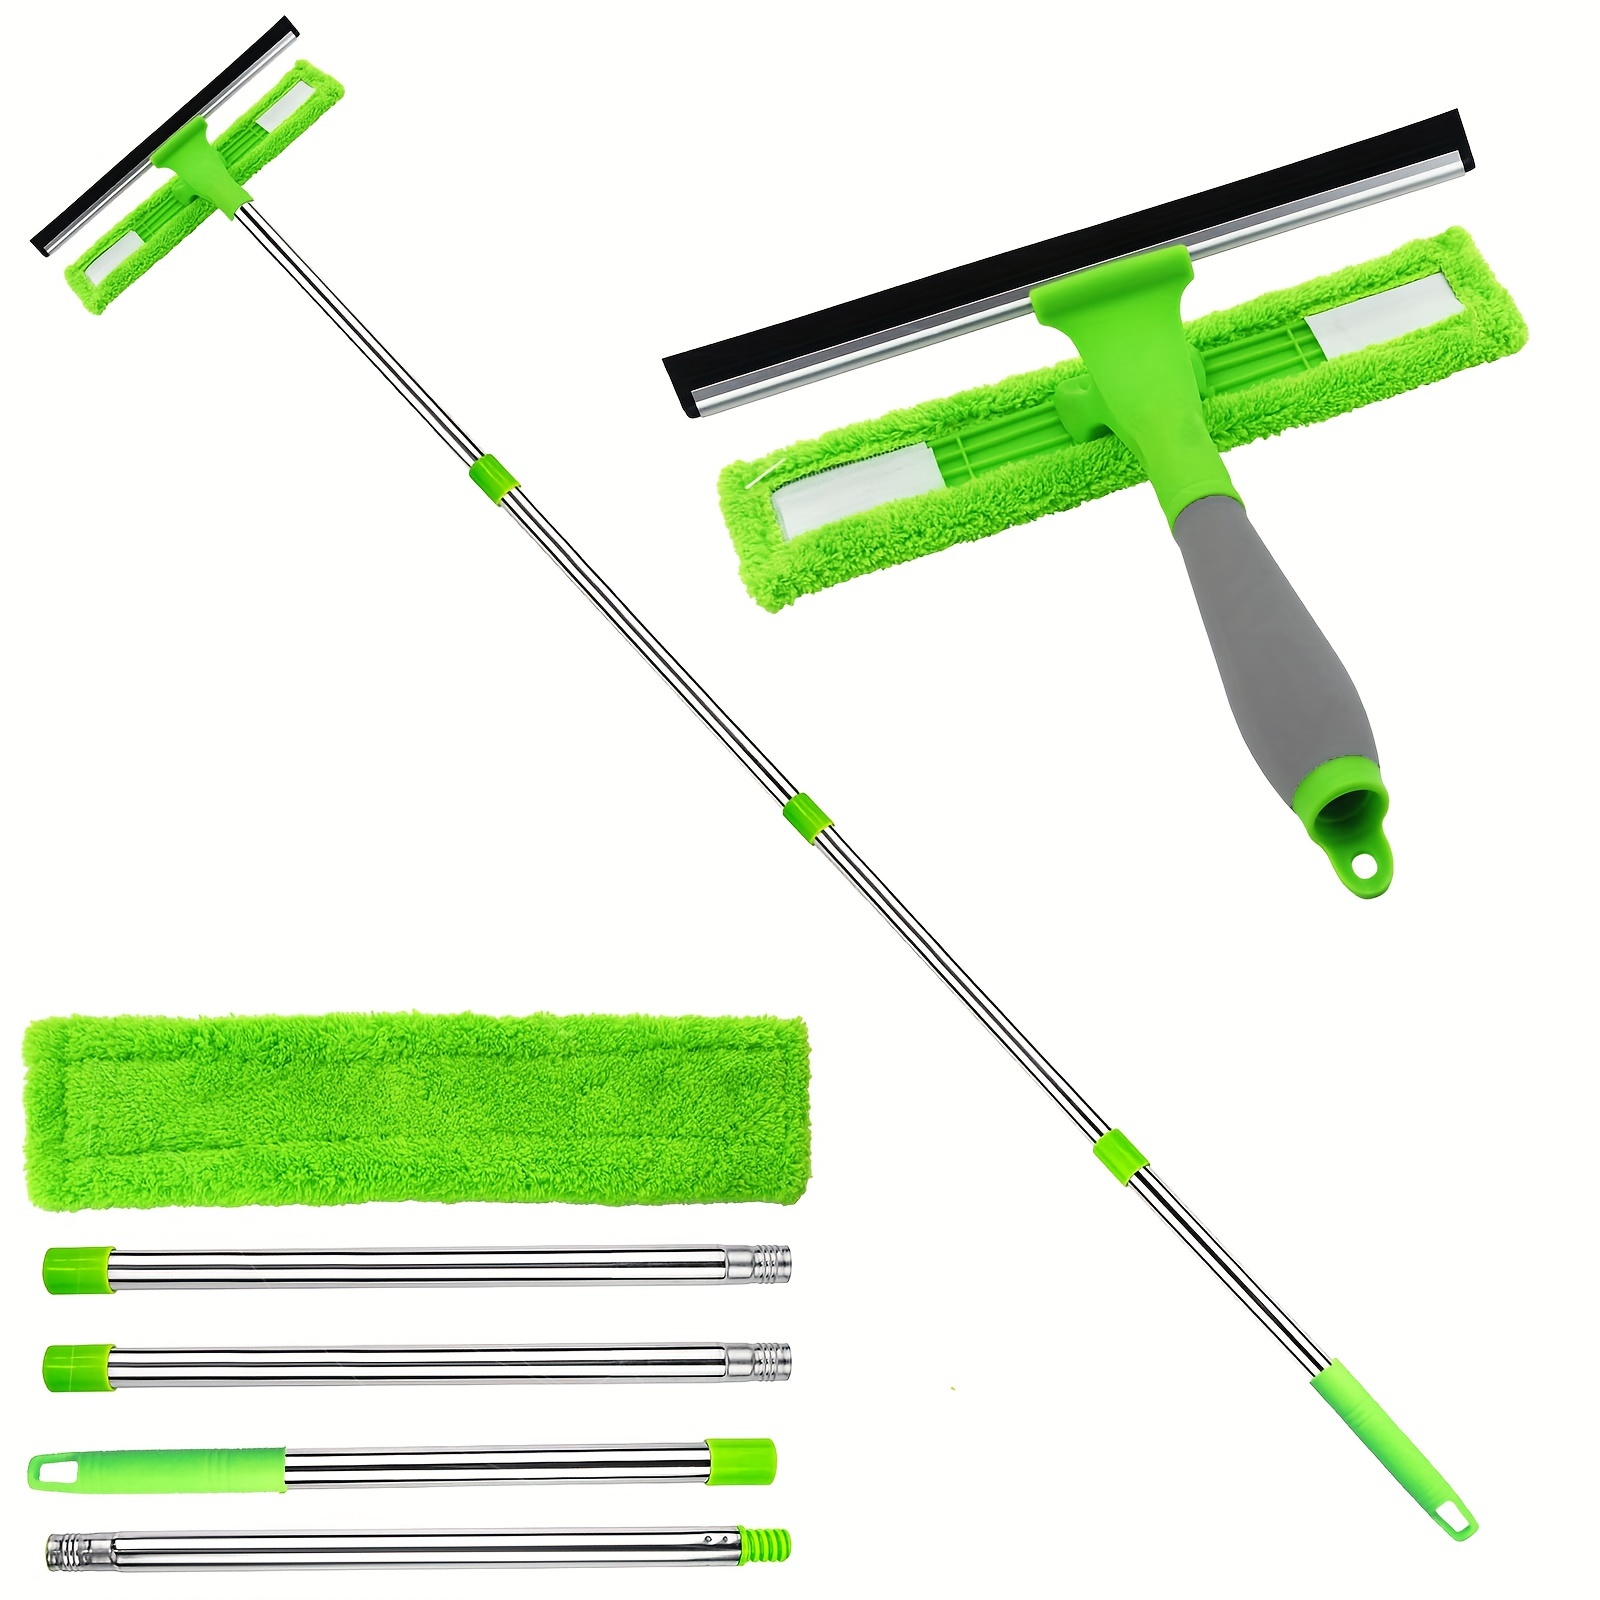 

1pc Window Squeegee With 67" Long Handle, Window Cleaning Squeegee Kit Include Window Cleaning Cloth 2 In 1 Window Cleaner, Car Squeegee And A Long Window Squeegee For Window, Car And Glass